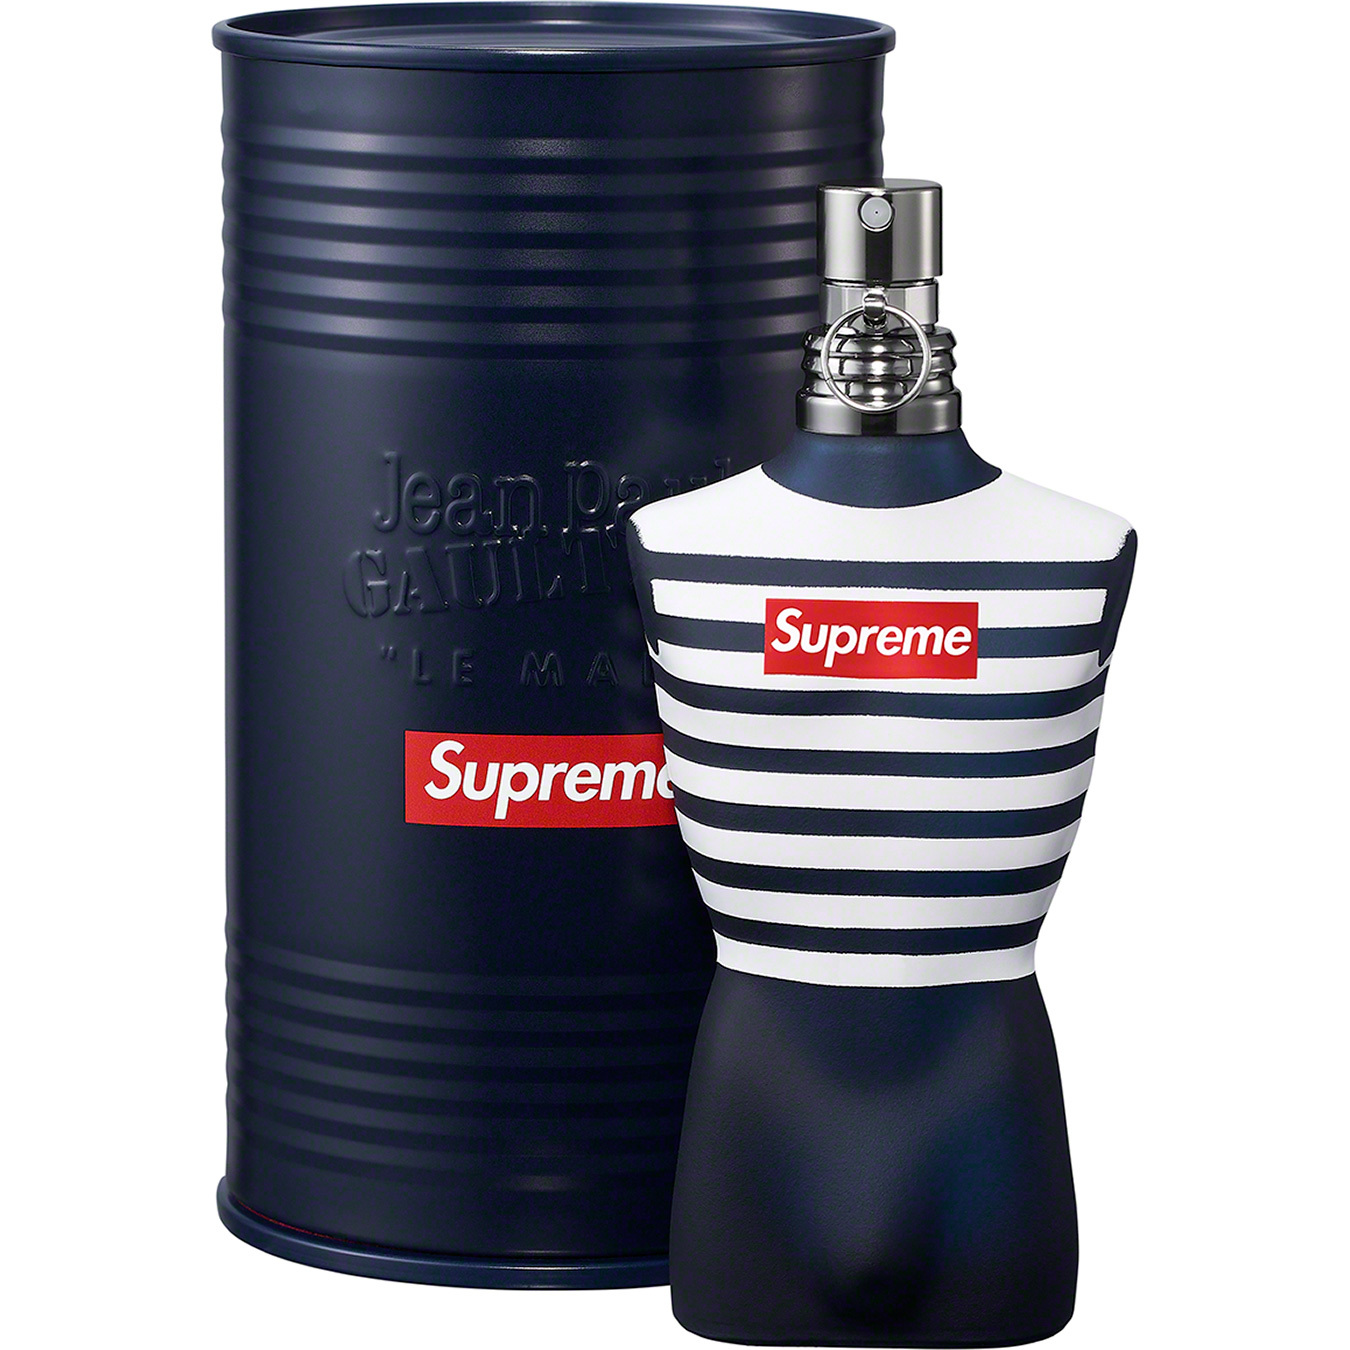 Gaultier's Le Male Scent Is a Supreme Collectible for the Ages